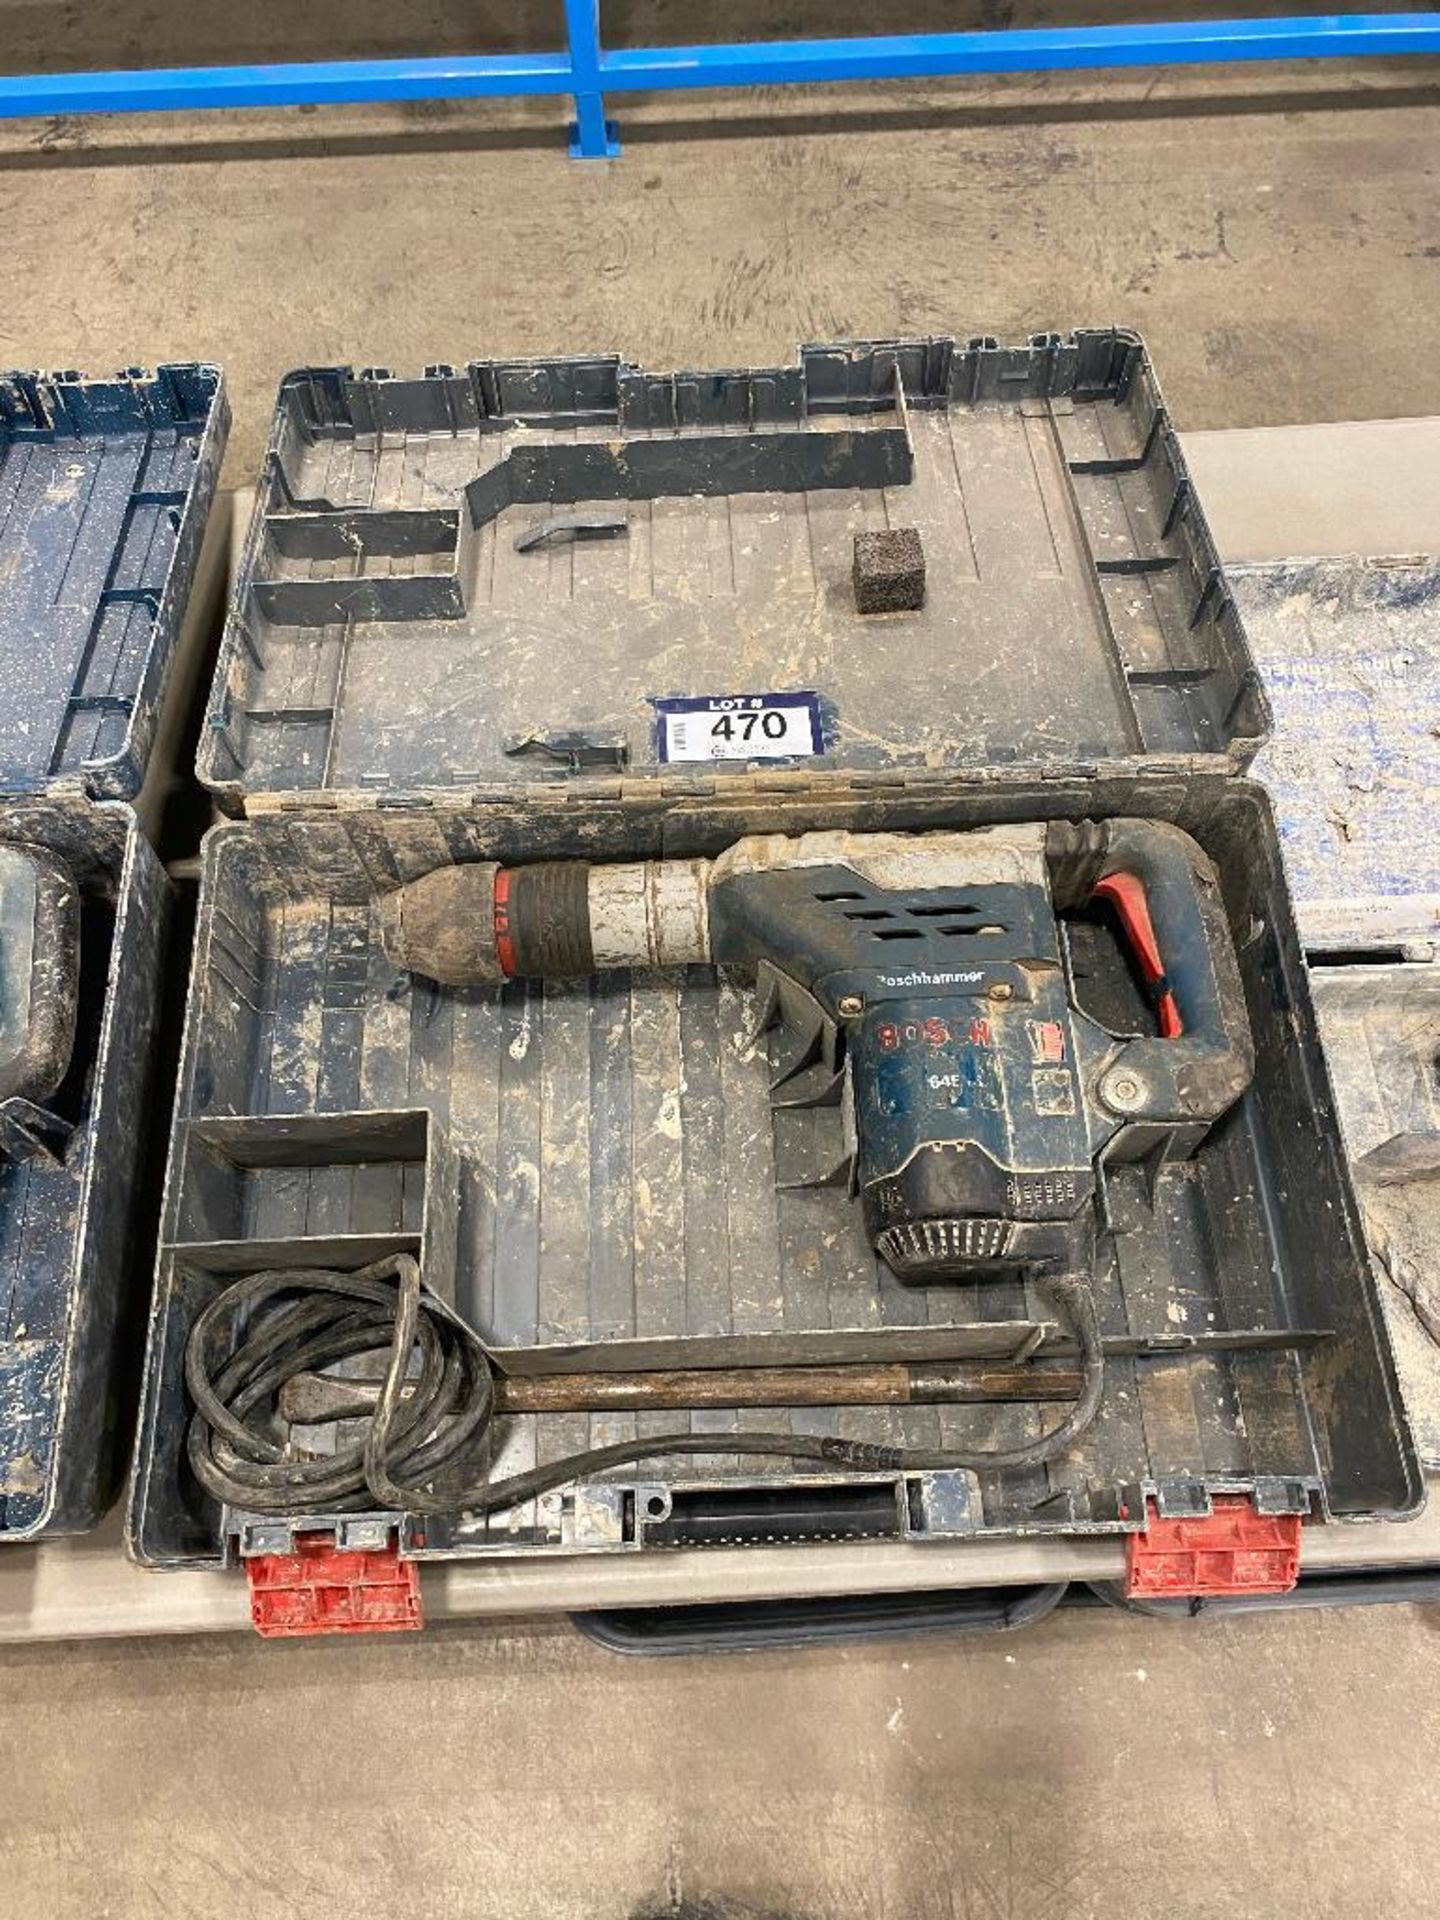 Bosch B64 Electric Hammer Drill w/ Case - Image 2 of 2